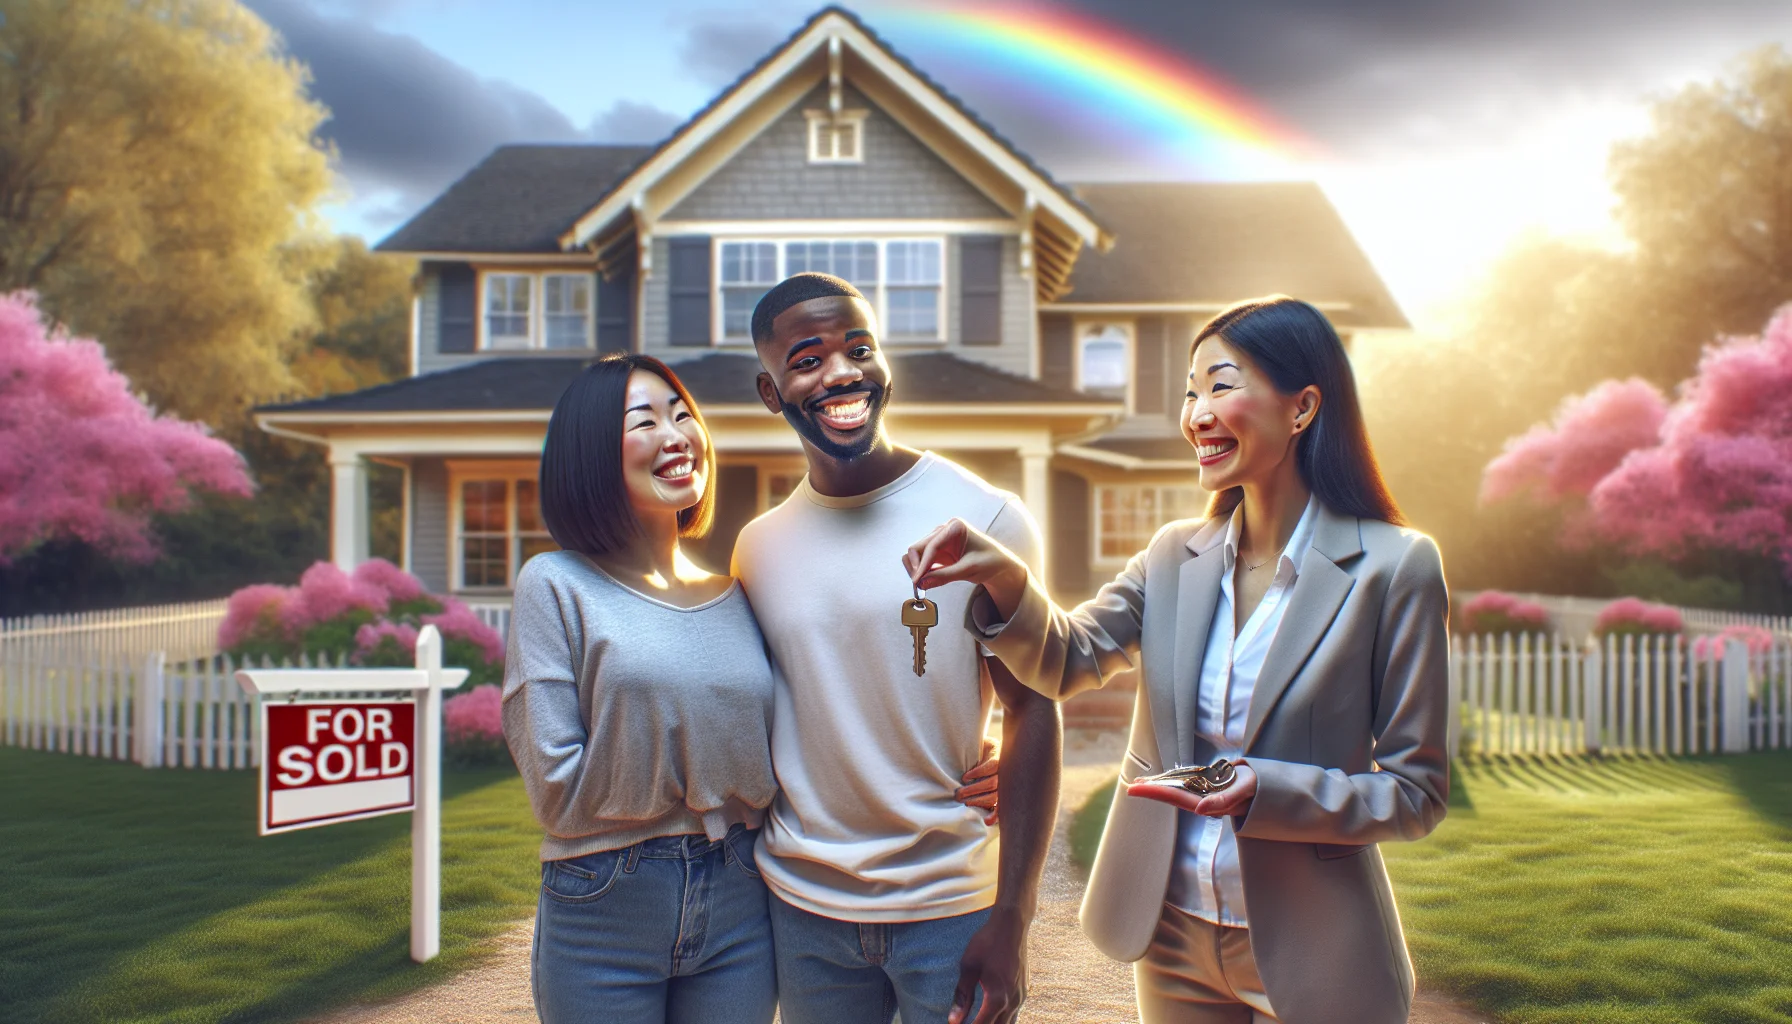 Imagine an amusing and realistic scene that depicts the absolute ideal situation in the world of real estate. A dual racial couple, Hispanic woman and Black man, smiling broadly as they accept the keys to their new home from a cheerful South Asian female real estate agent. The house in the backdrop is a beautiful suburban family home with a manicured lawn, a picket fence, and a SOLD sign out front. The environment exudes pure joy and satisfaction, lighting up the whole atmosphere with both nature and sun shining brightly, a rainbow arching overhead to add to the picture-perfect setting.